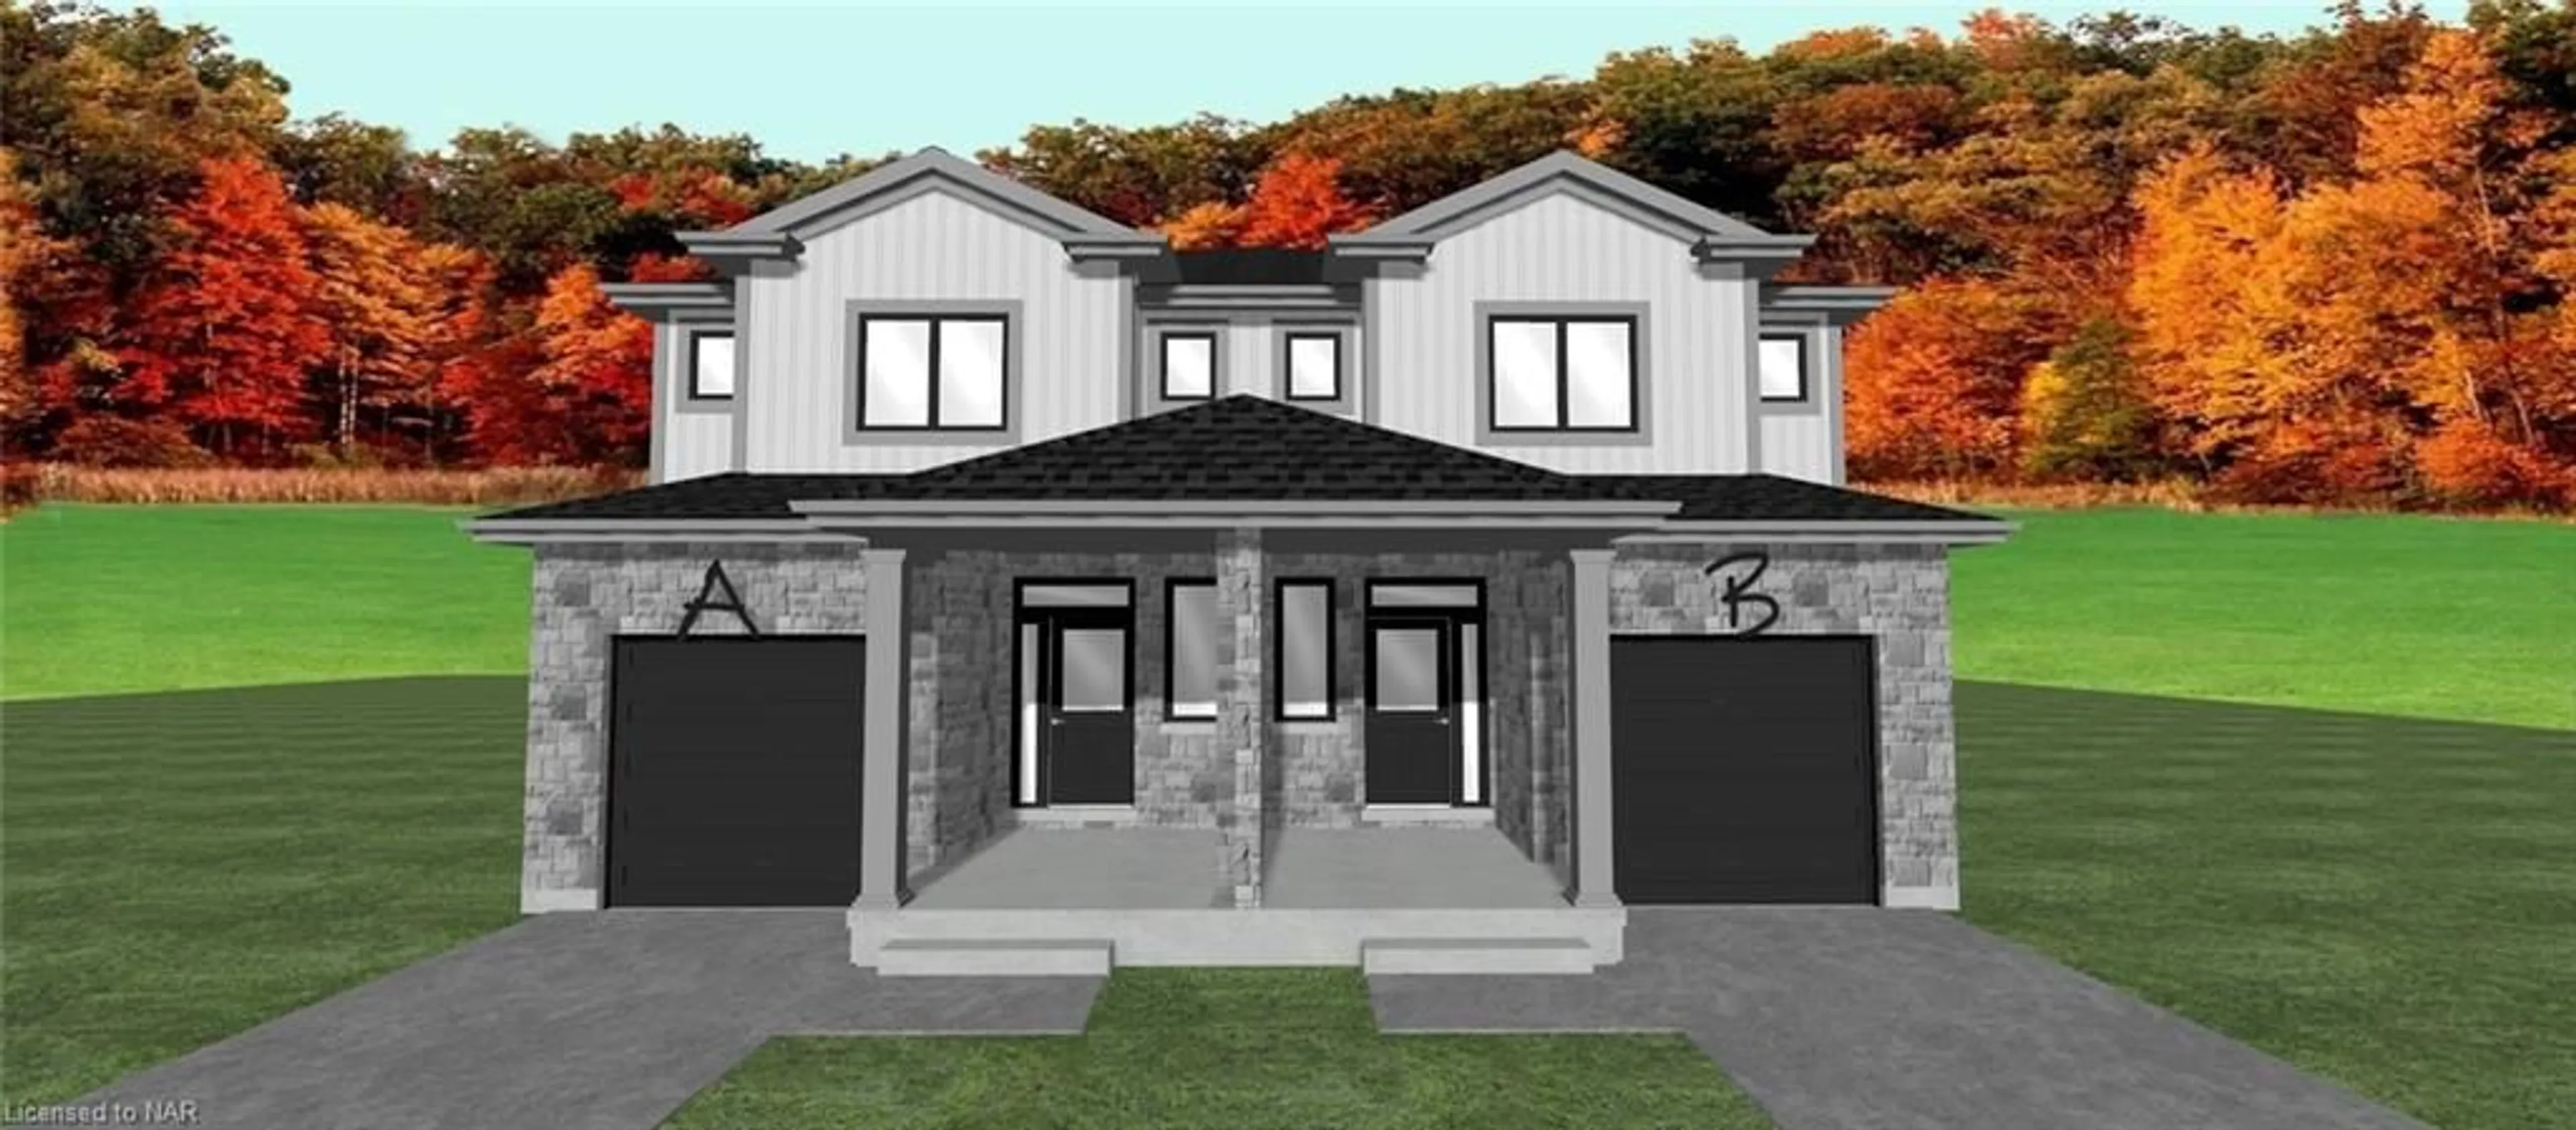 Frontside or backside of a home for LOT 133 B Hawkins St, Niagara Falls Ontario L2G 3B7